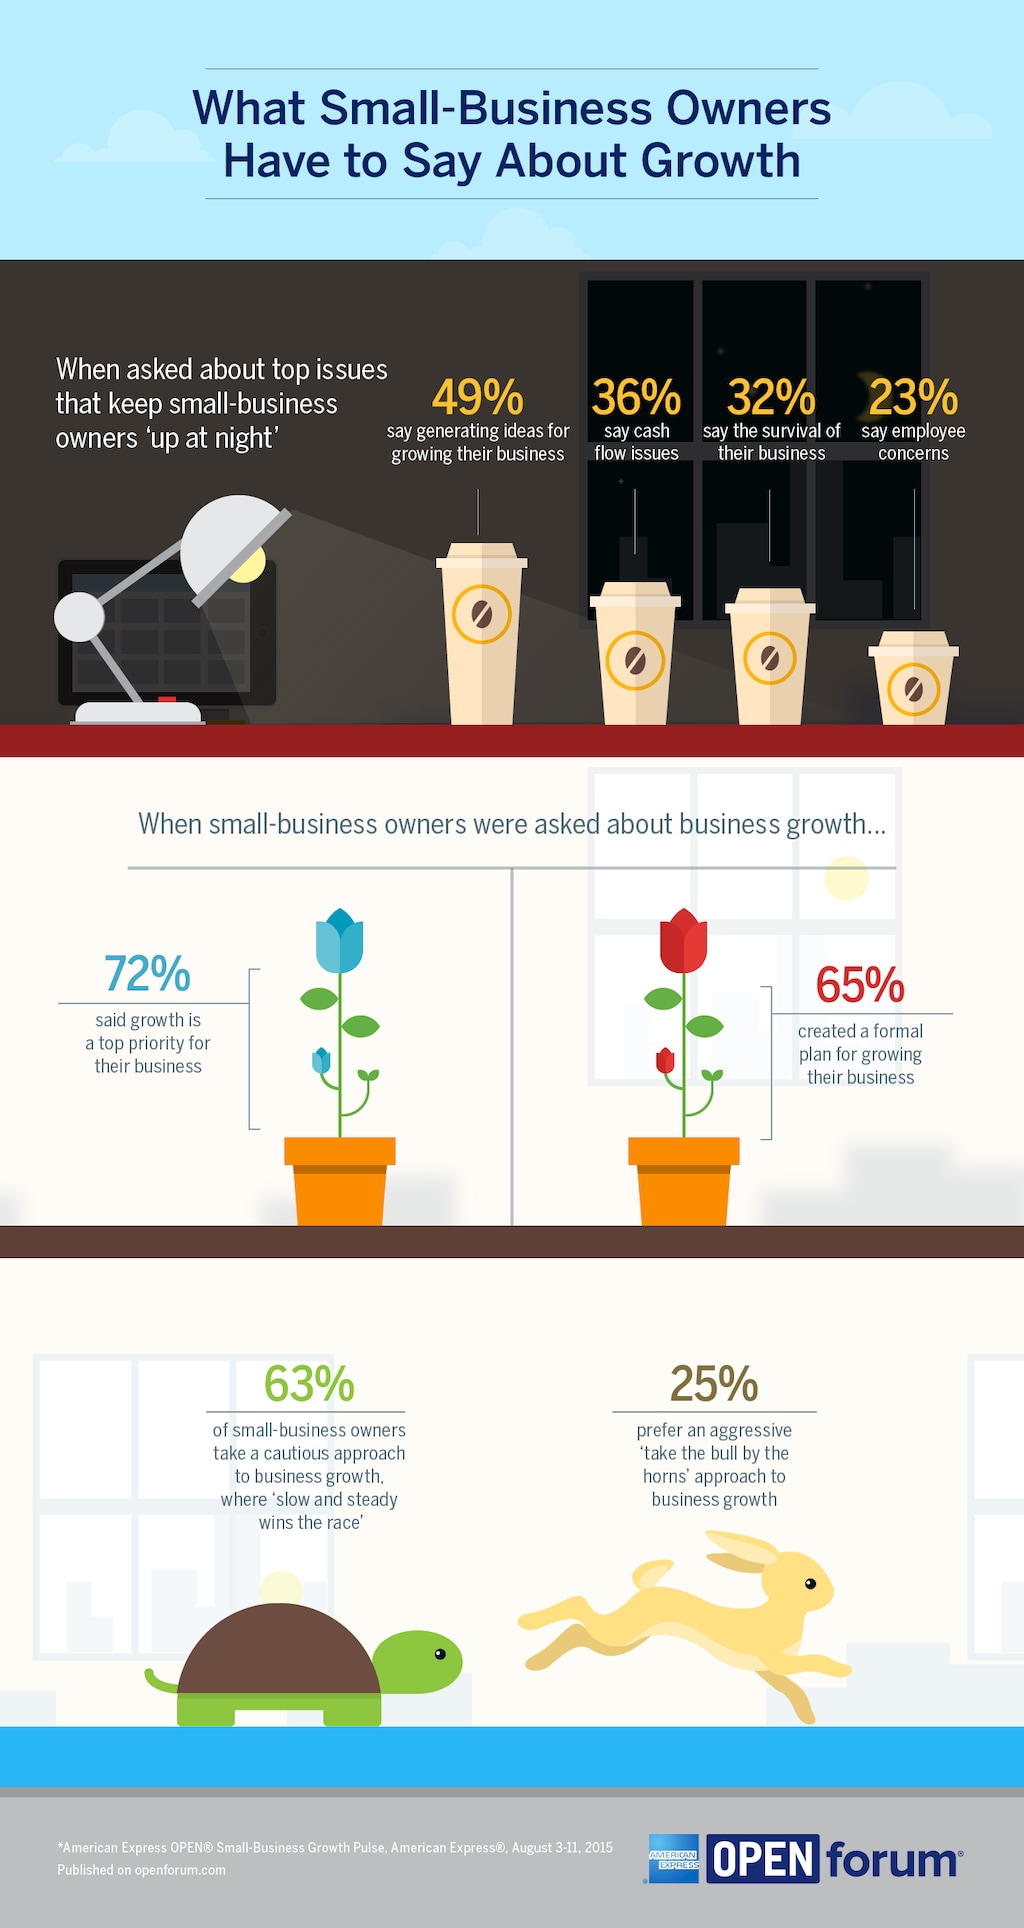 What Small-Business Owners Have to Say About Growth